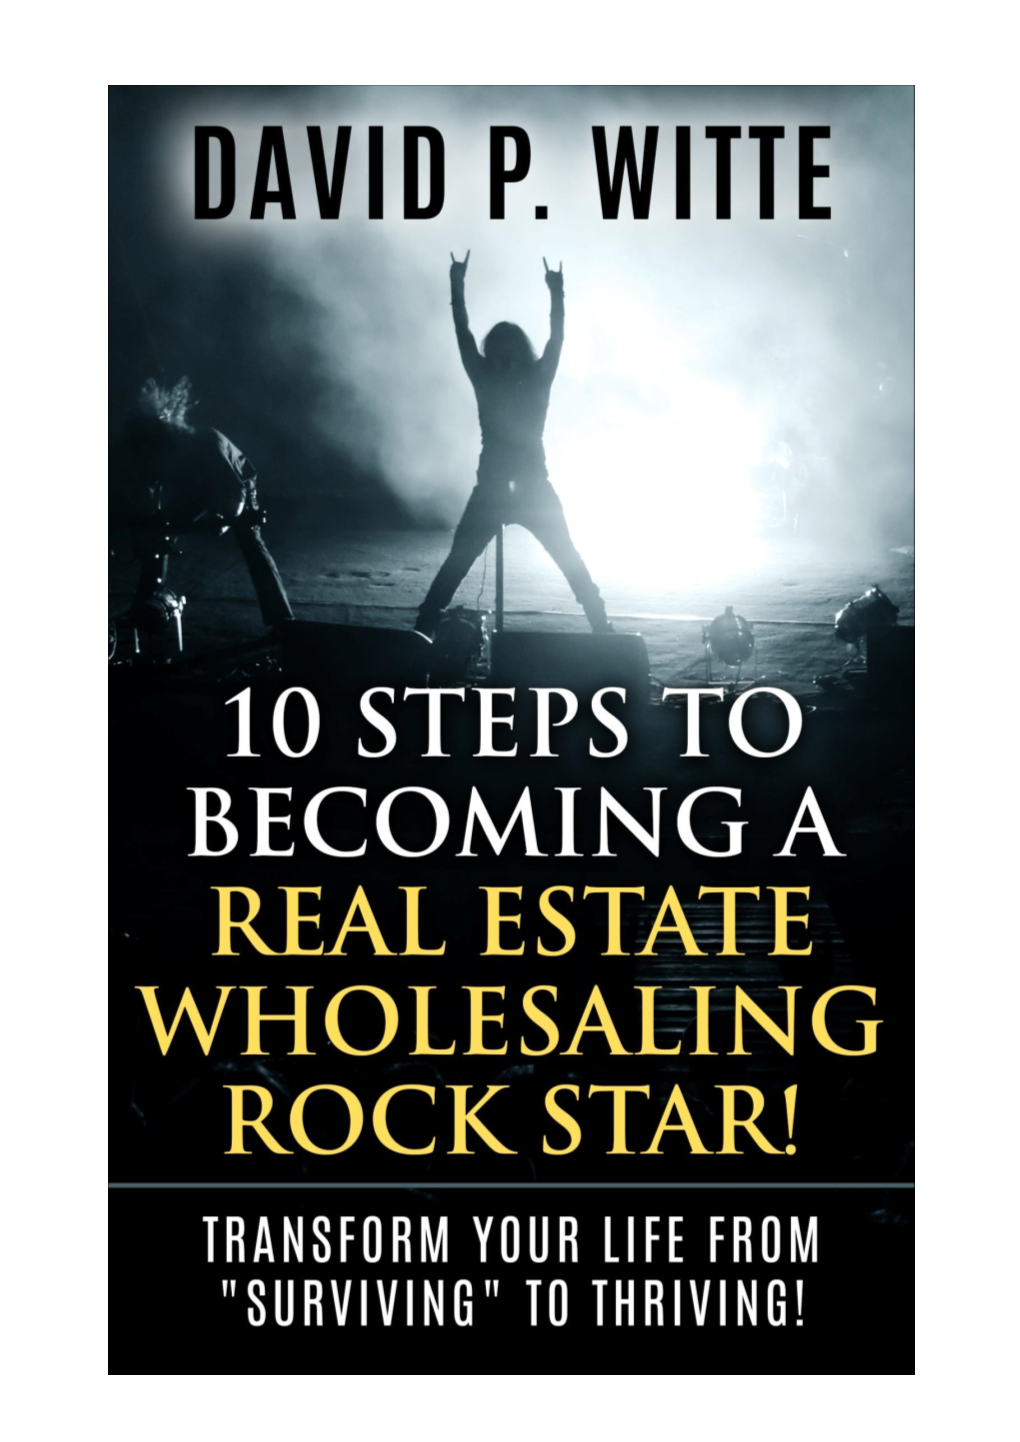 10 Steps to Becoming a Real Estate Wholesaling Rock Star!